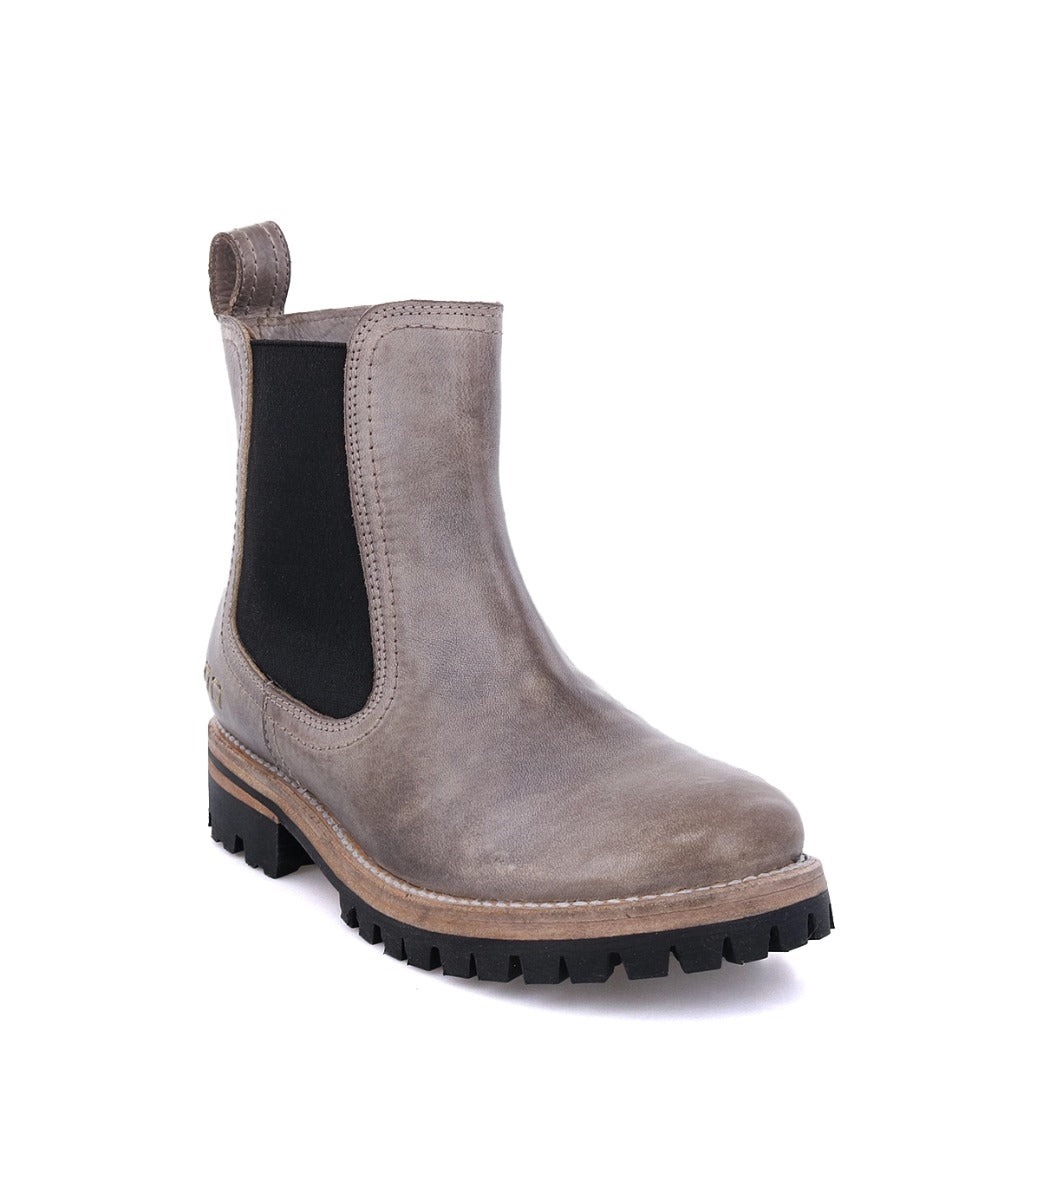 A grey leather Kiefra Trek chelsea boot with black outs by Bed Stu.